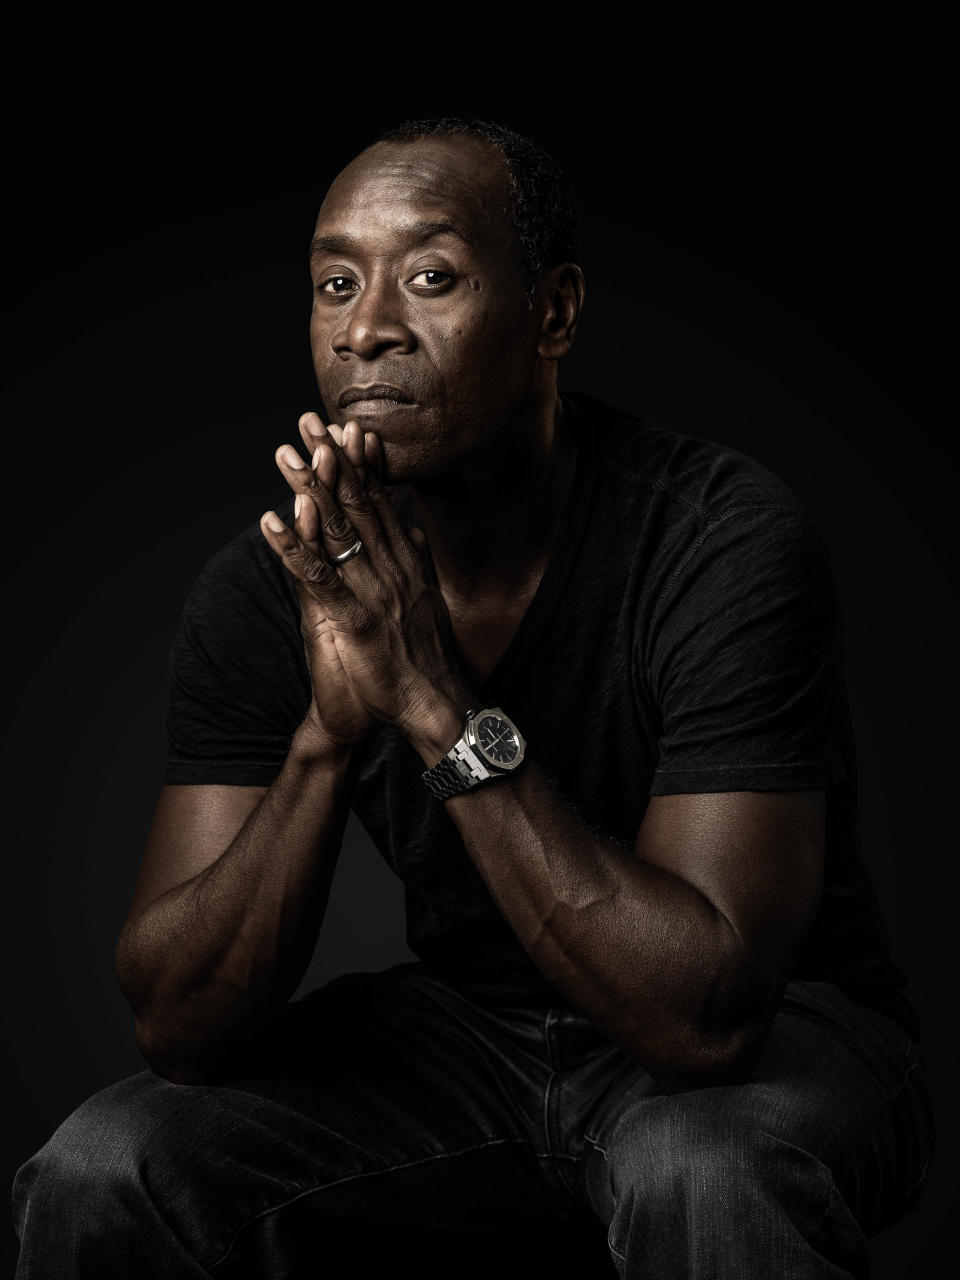 &ldquo;I pray that our leaders stop pointing fingers and playing the blame game and seek a real solution for the good of the planet and all who inhabit it. It is the least represented among us who will be the most affected first. We have a moral responsibility to protect them.&rdquo; --<strong> Don Cheadle, actor and&nbsp;UNEP goodwill ambassador</strong>